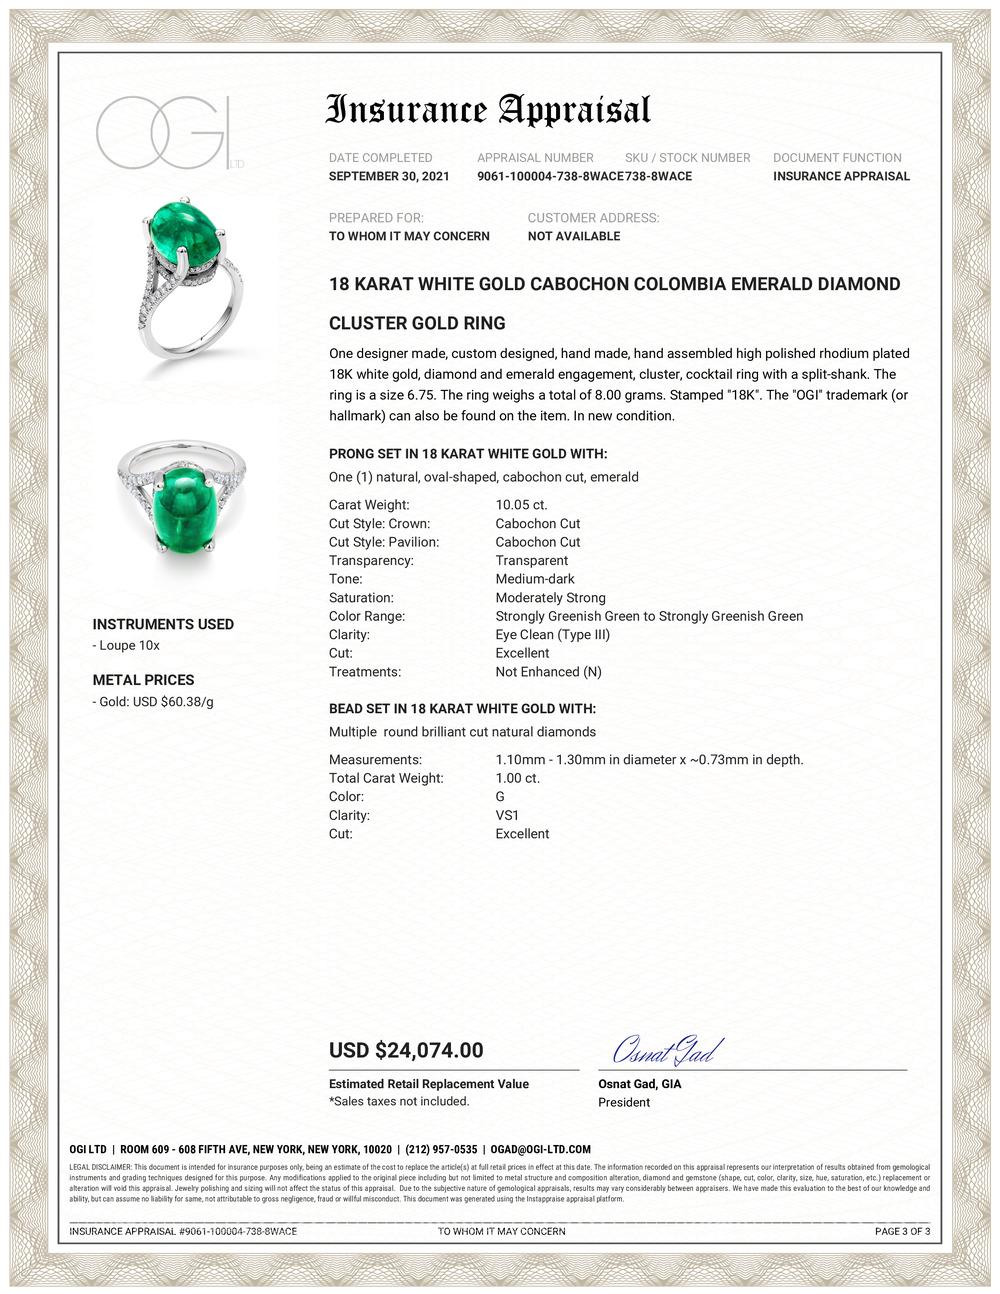 18 karats White gold cocktail cluster ring 
Colombia cabochon emerald weight 10.05 carat 
Surrounded by pave-set diamond weighing 1 carat
The emerald color is deep summer grass green The emerald is crystal clear with few natural fissures. Emeralds